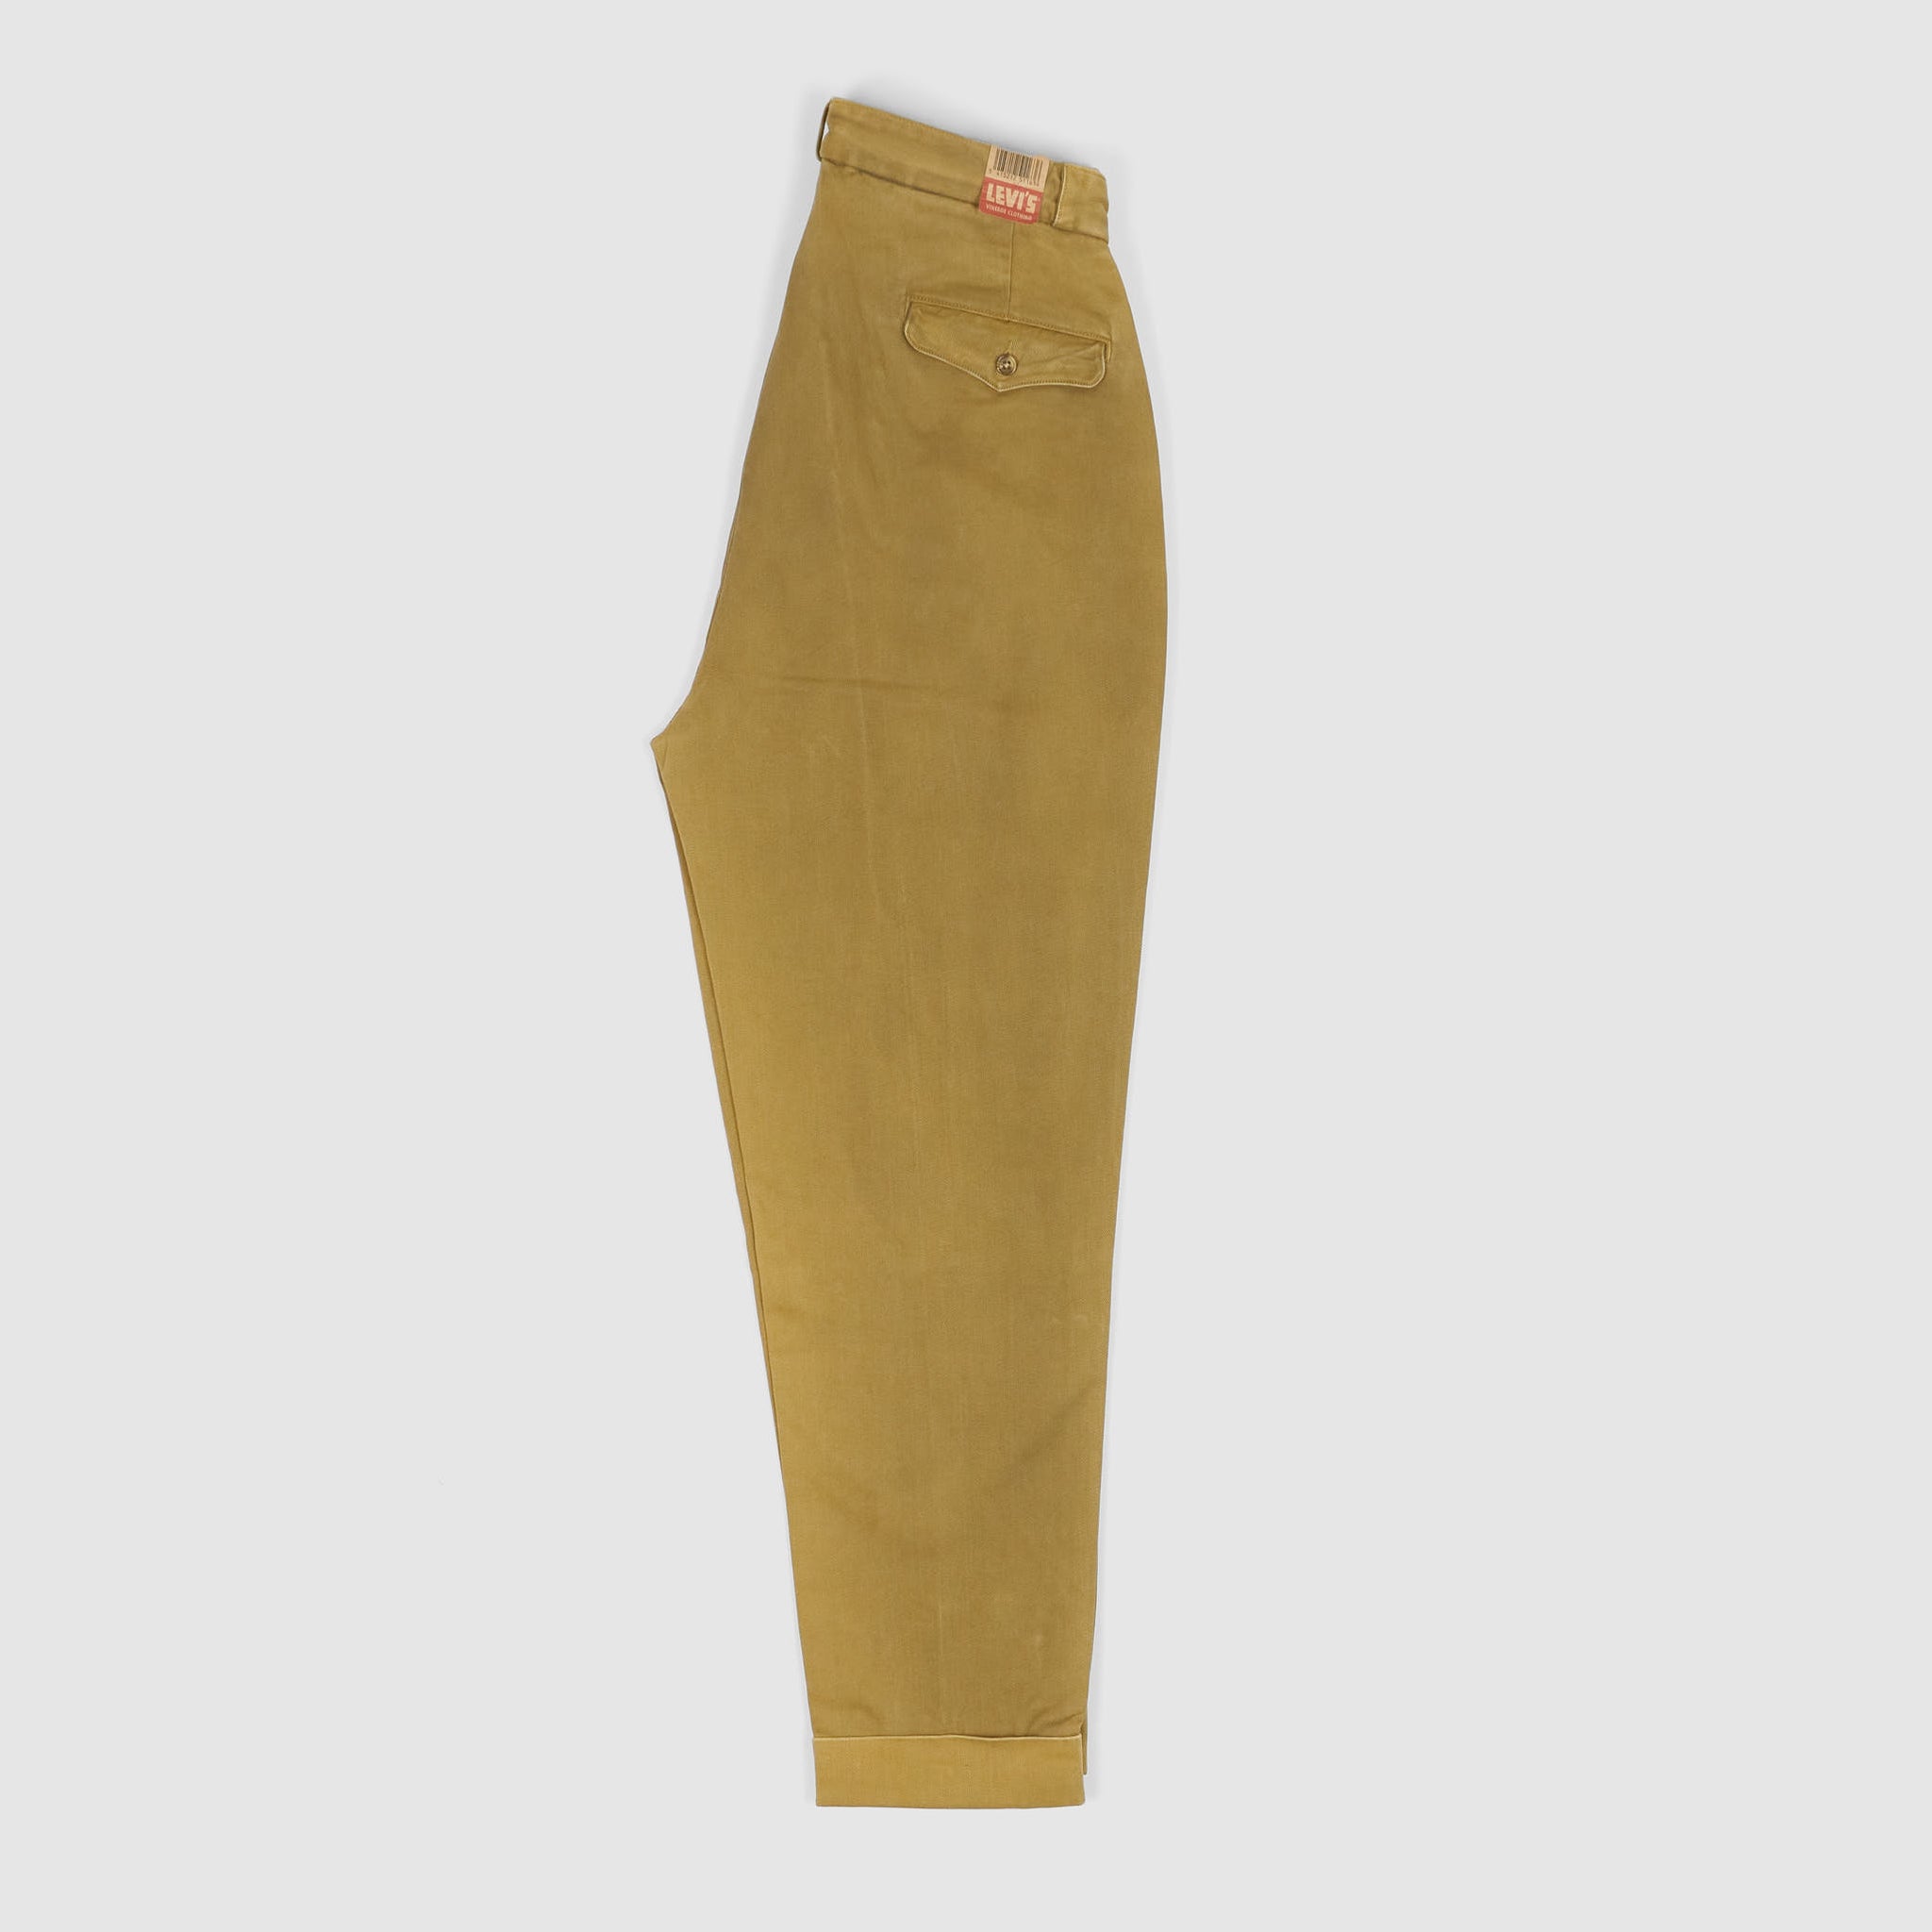 Levi's® Vintage Clothing 1920's Chinos - DeeCee style